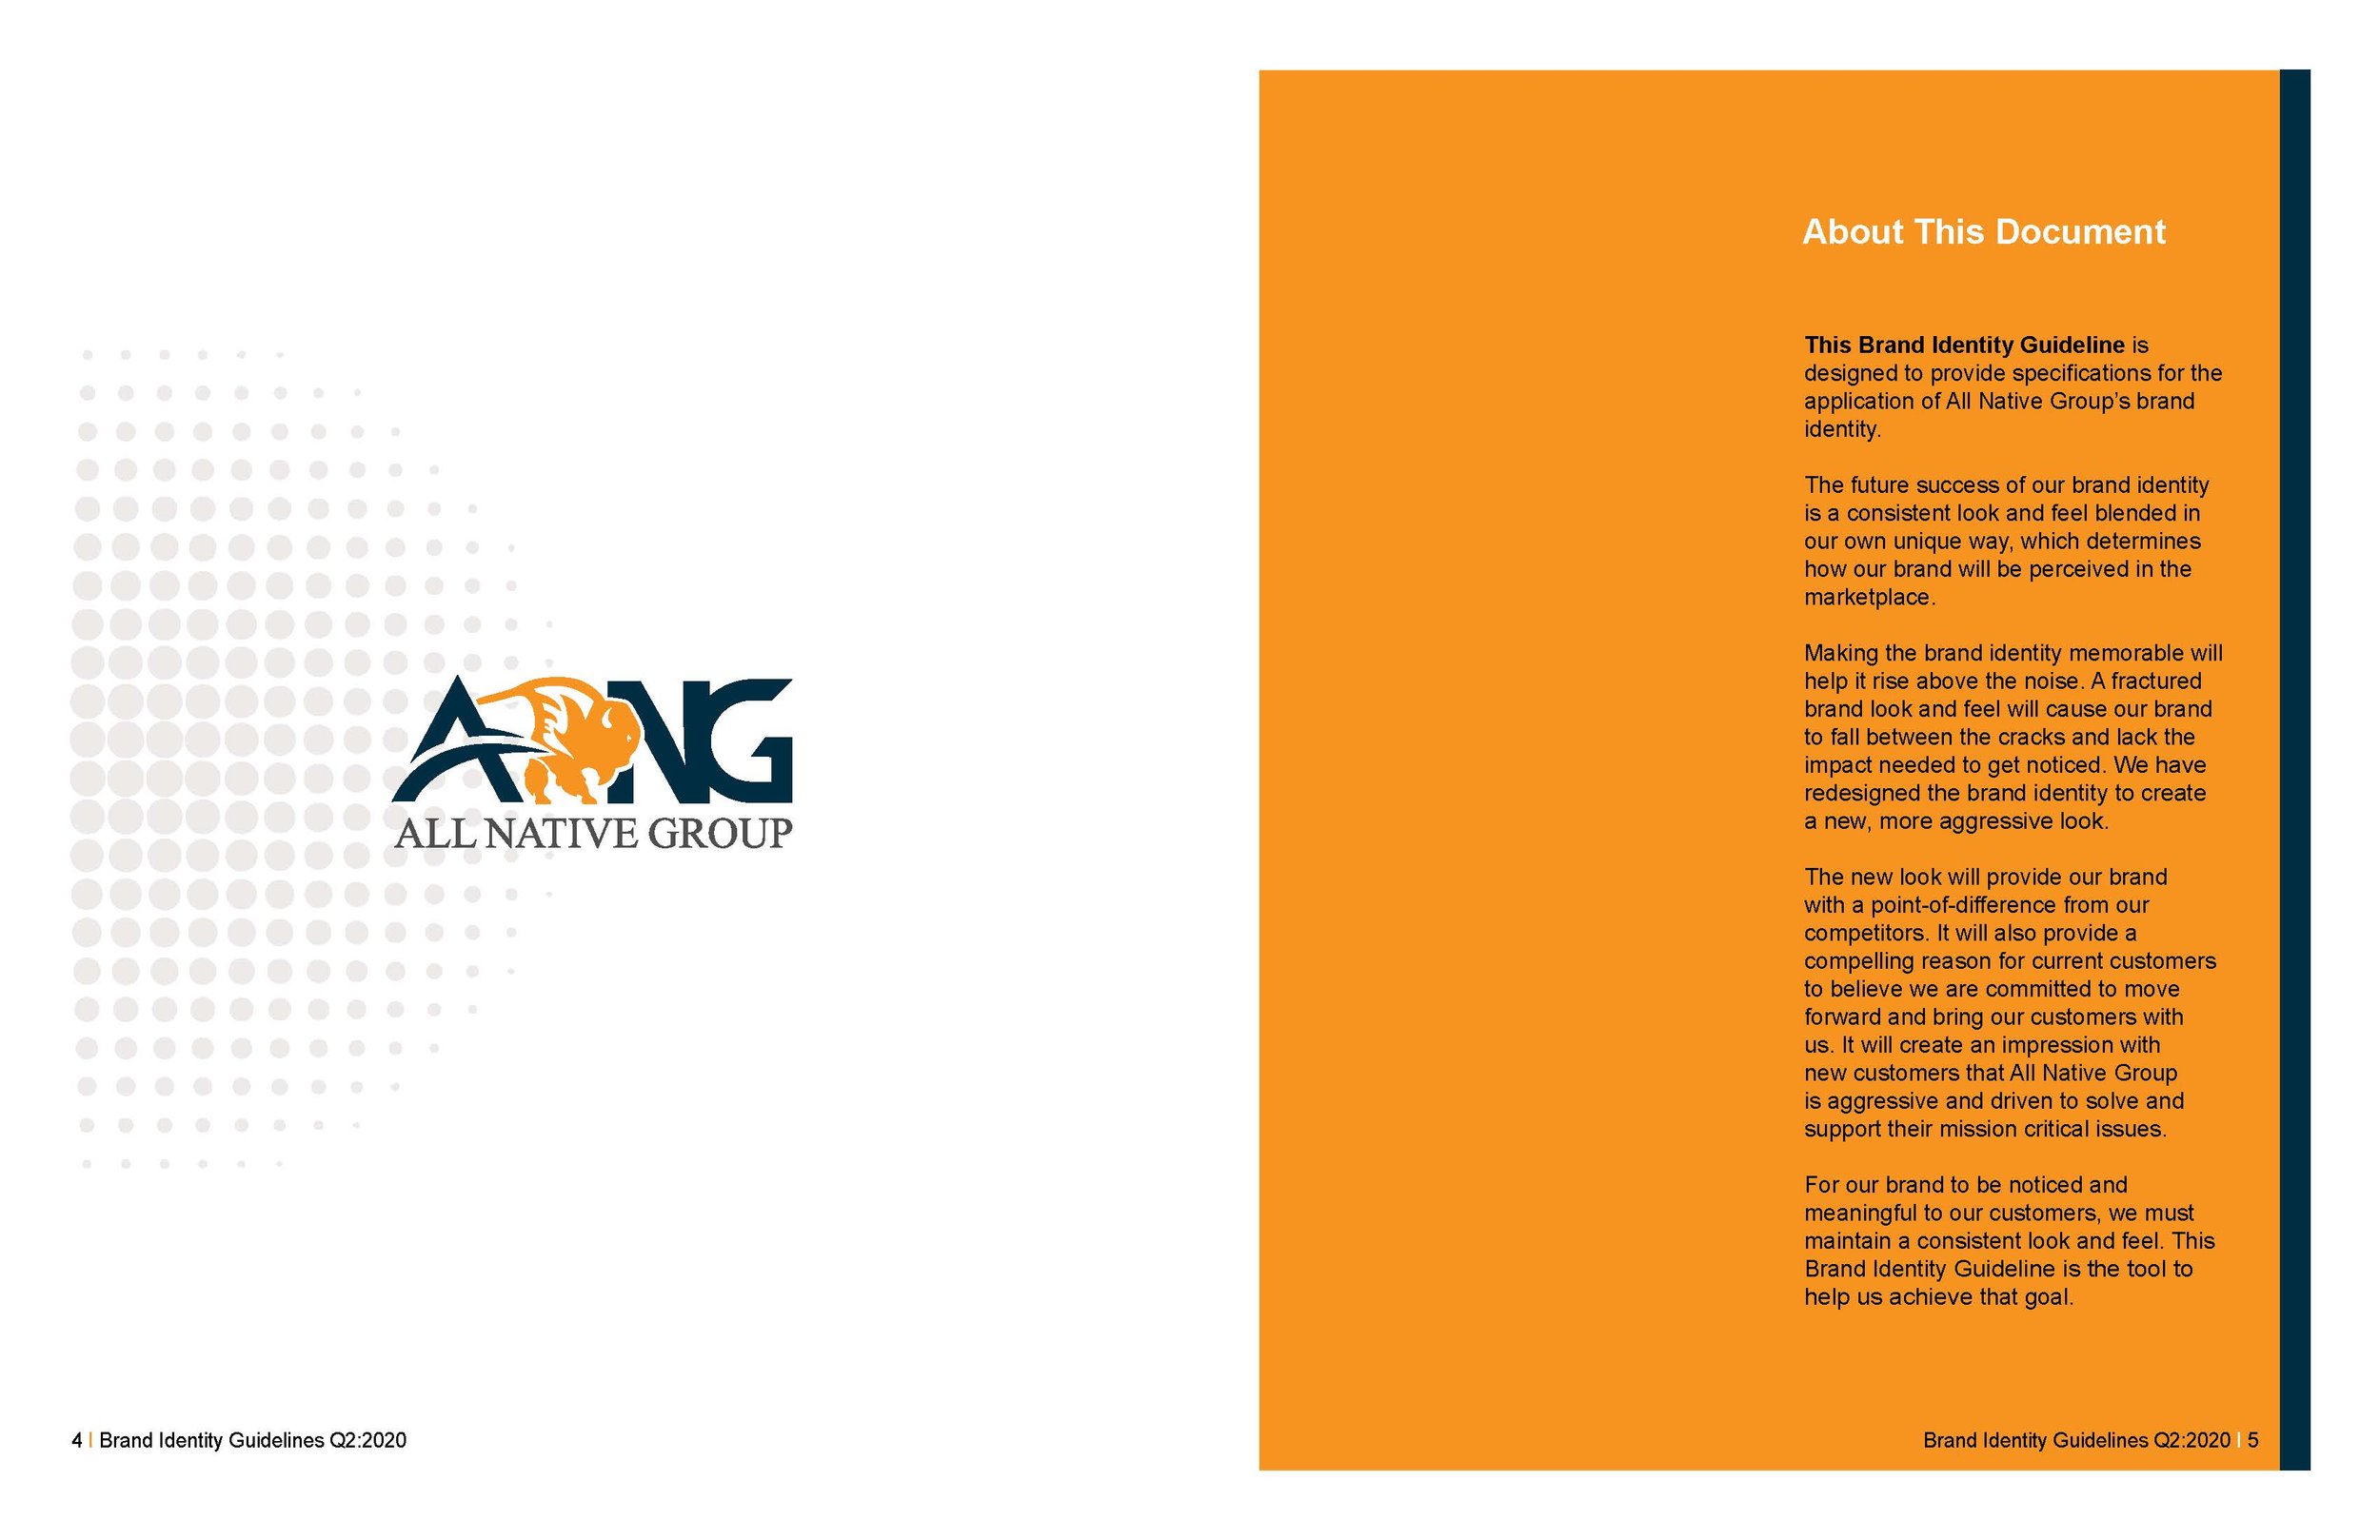 ANG Brand Identity Branding Guidelines_2pg spreads_Page_03.jpg